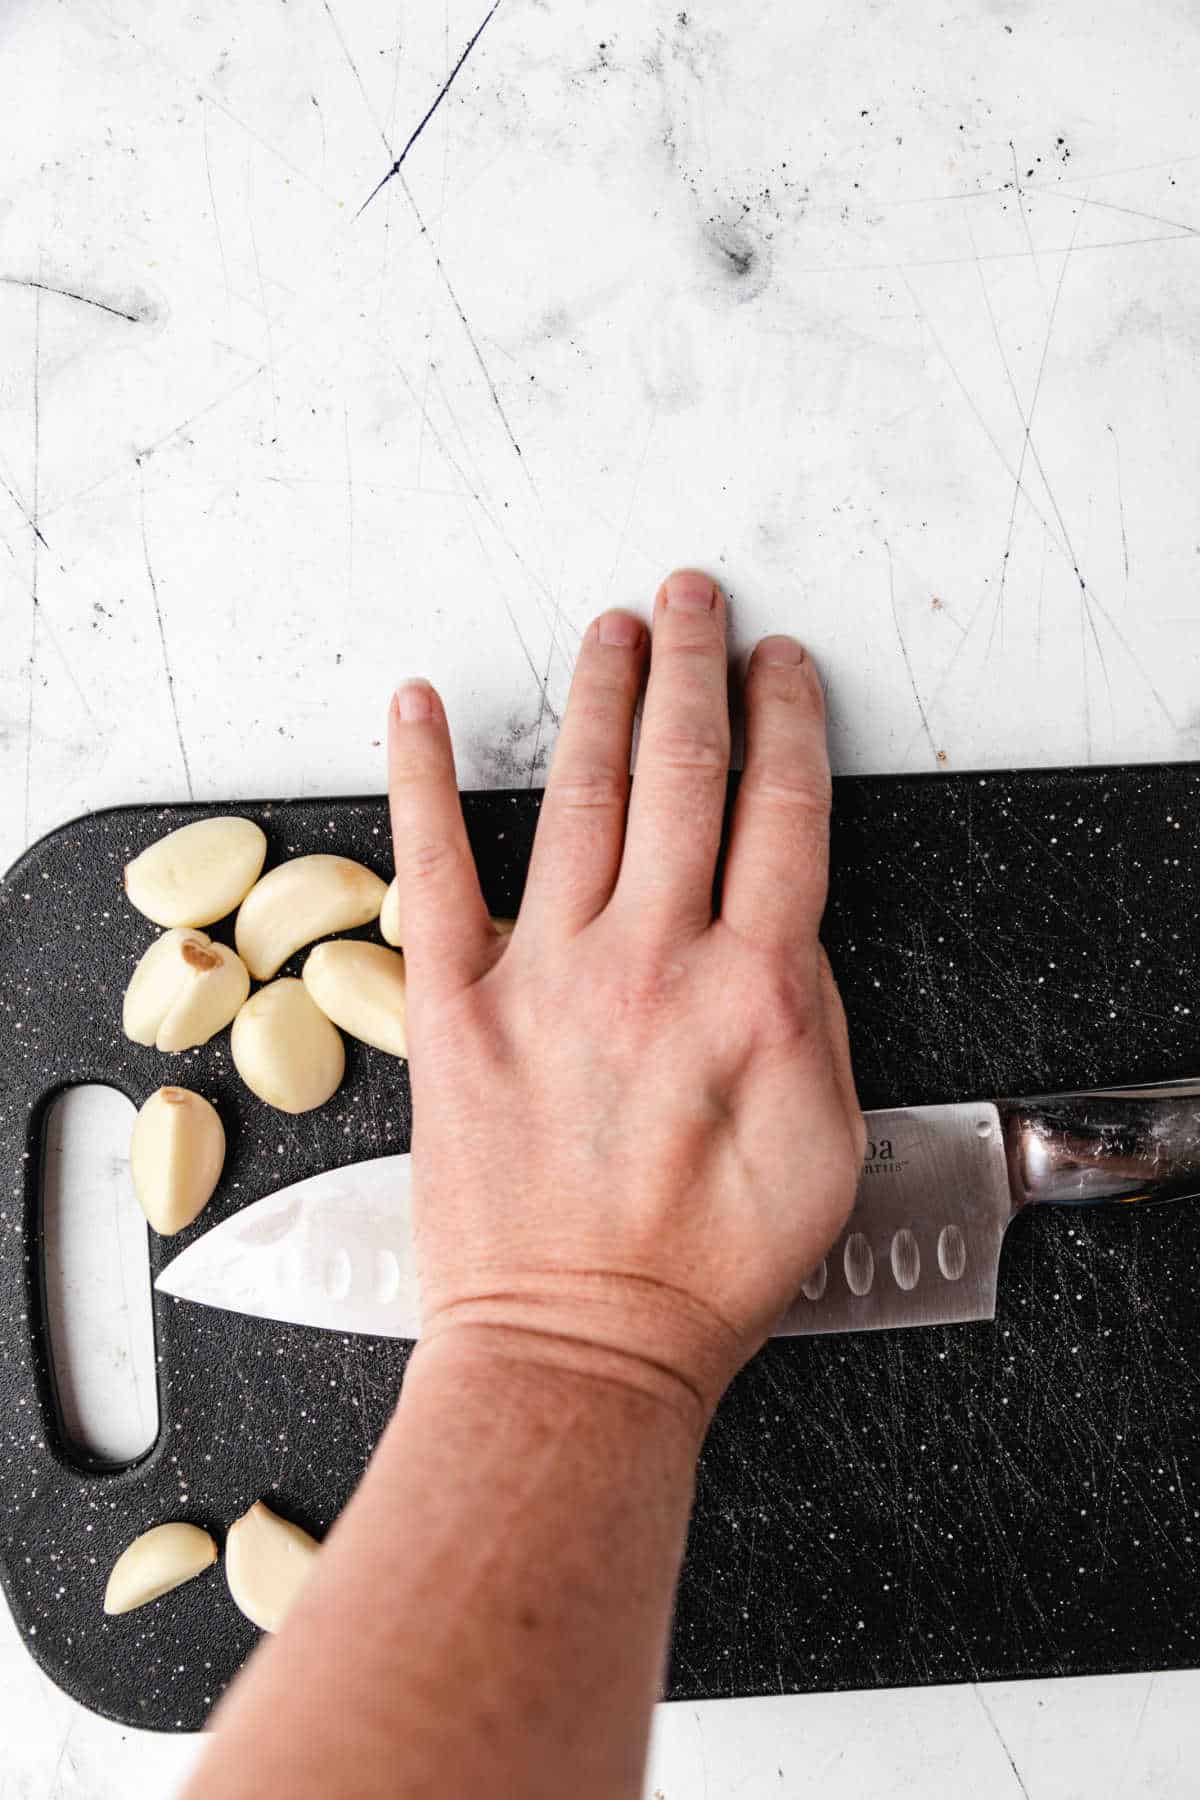 A hand pushing down on a knife to smash cloves of garlic. 